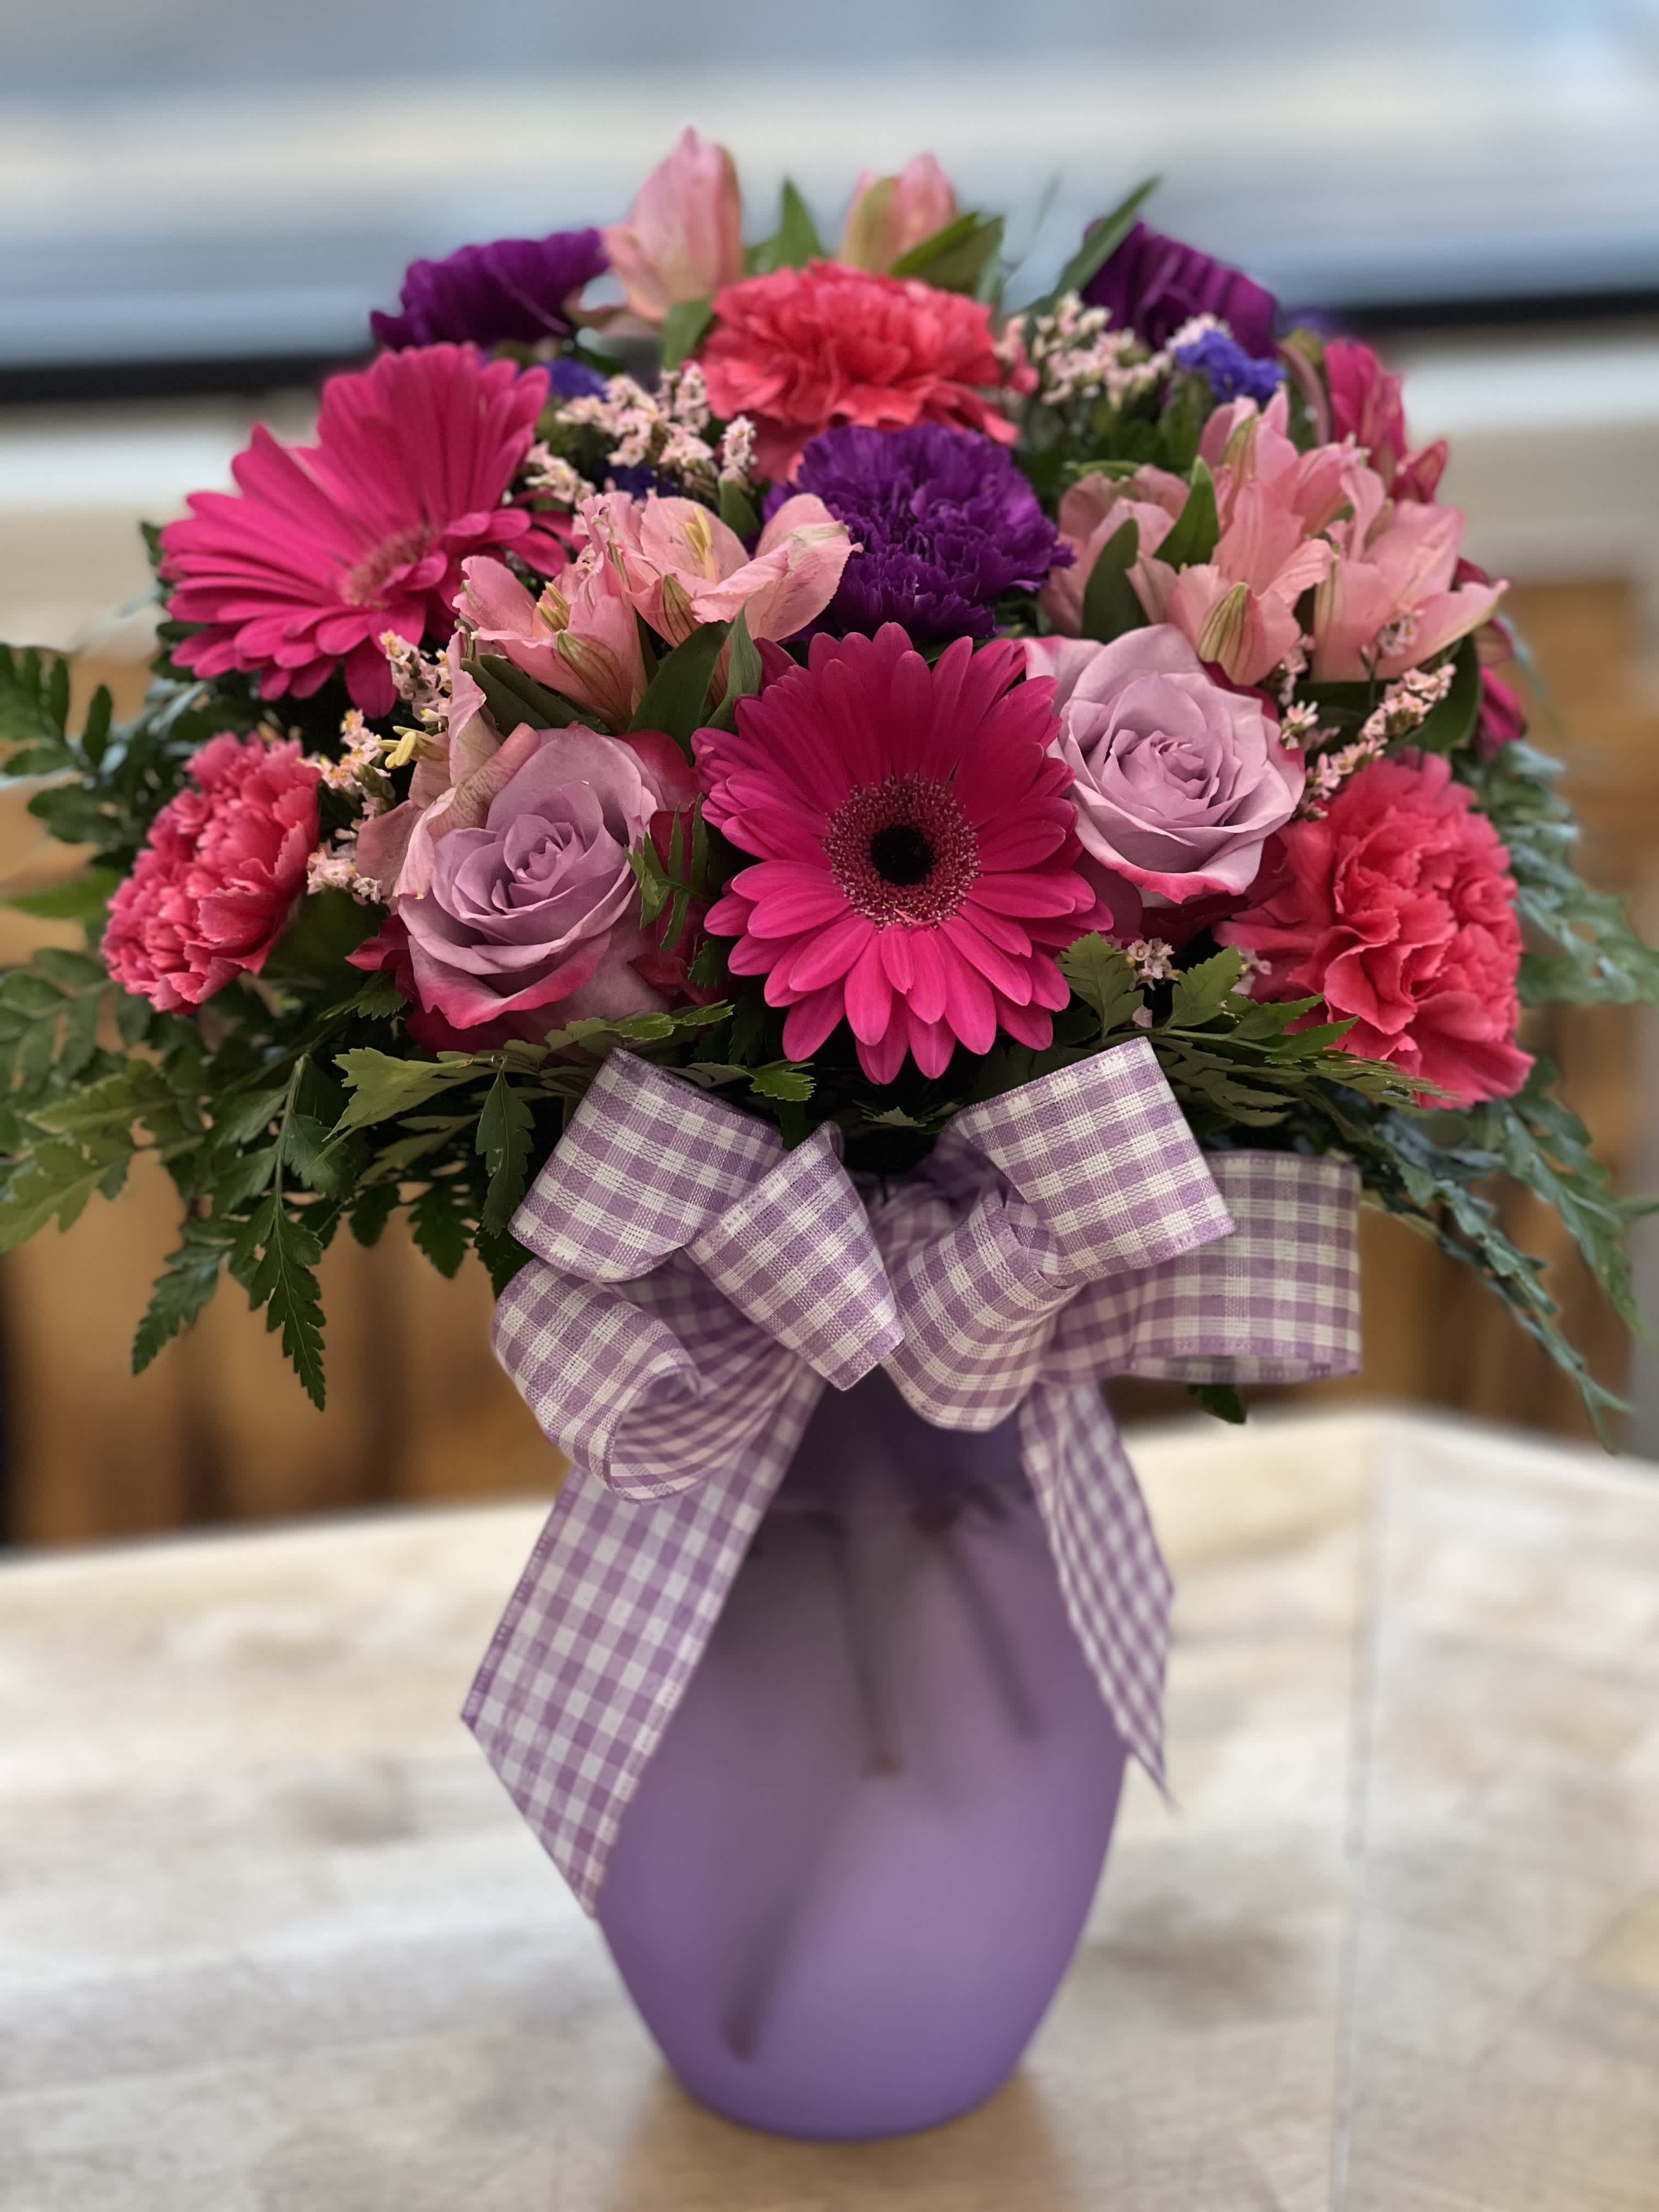 Loving Lavender - Enjoy spring with this fun bouquet! 